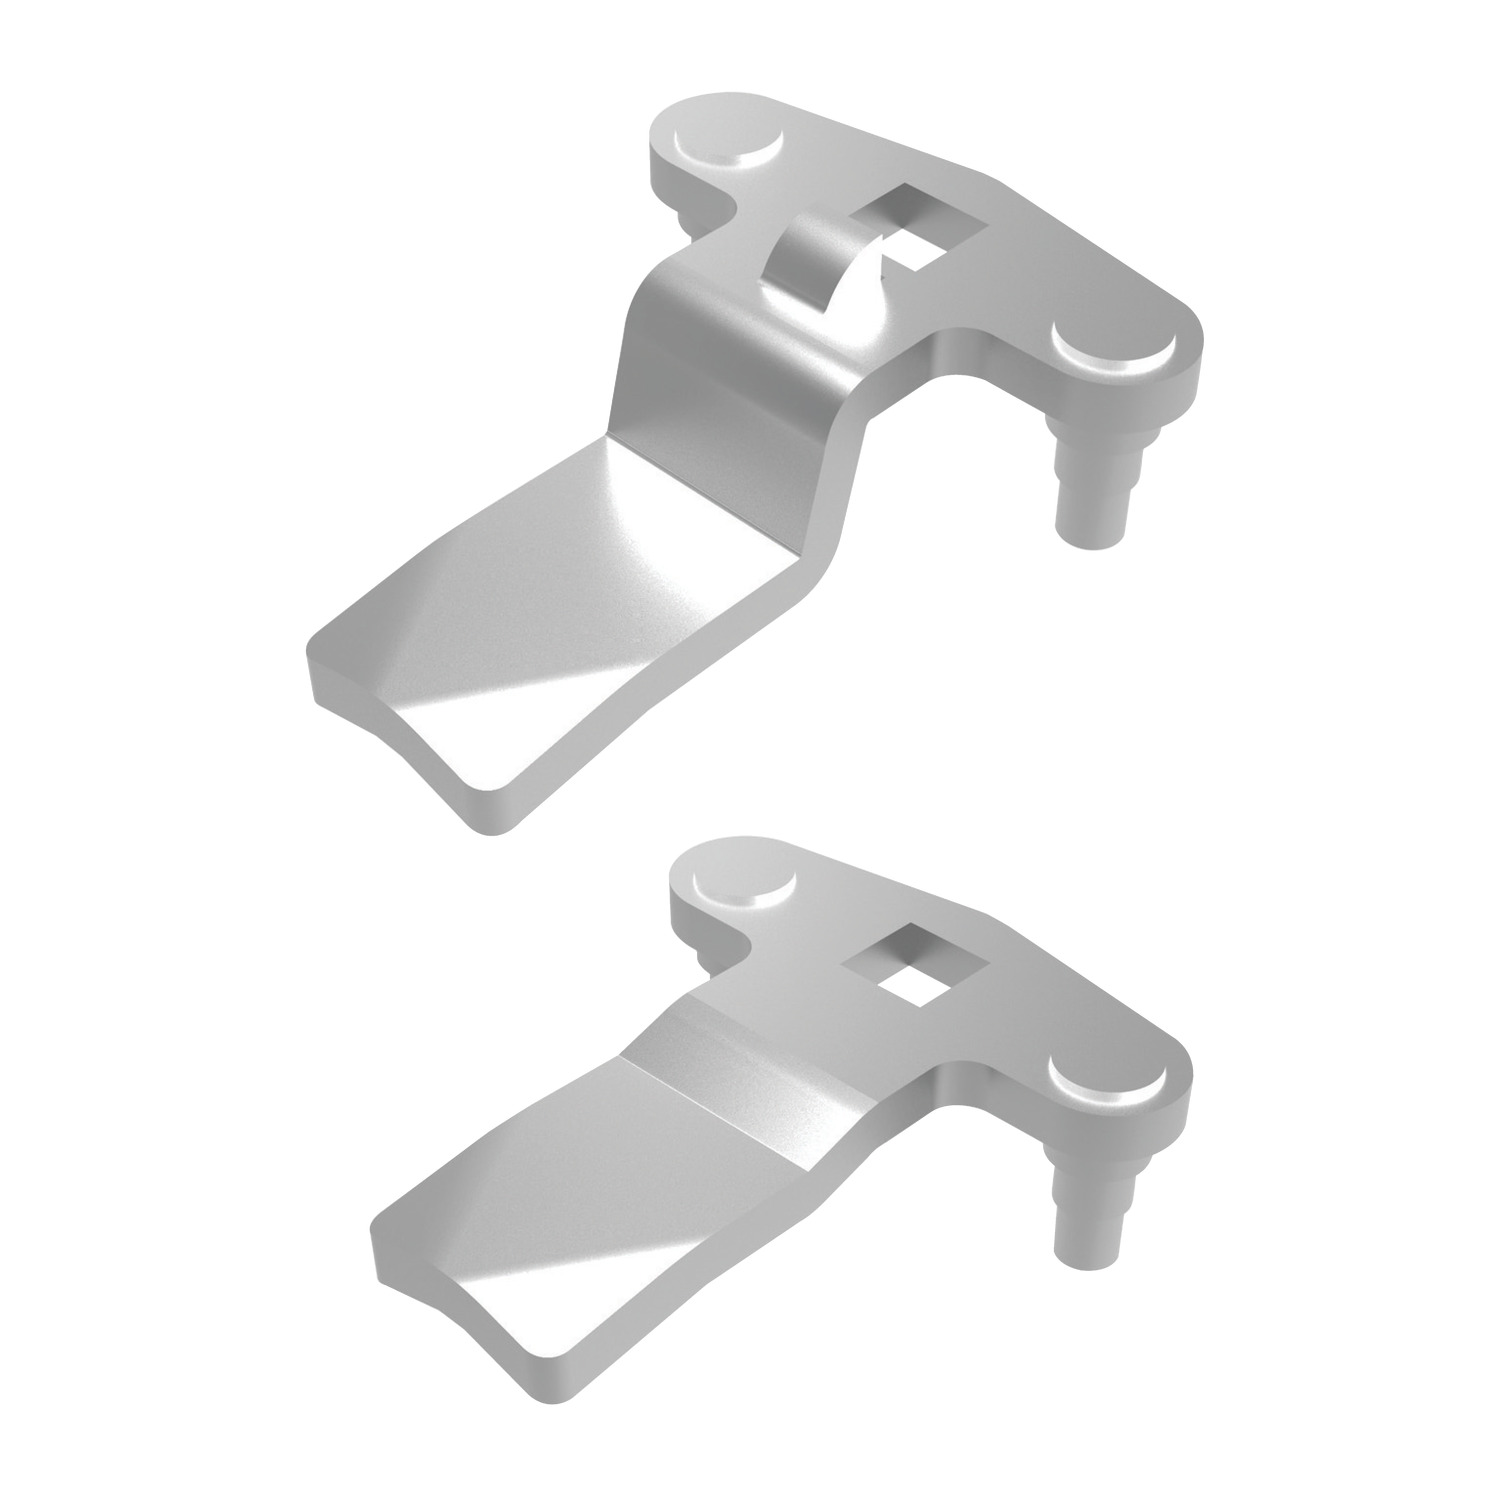 Product A0240, Two Point Cams - Flexi-System for 3-point latching of cam latches and locks - zinc / 